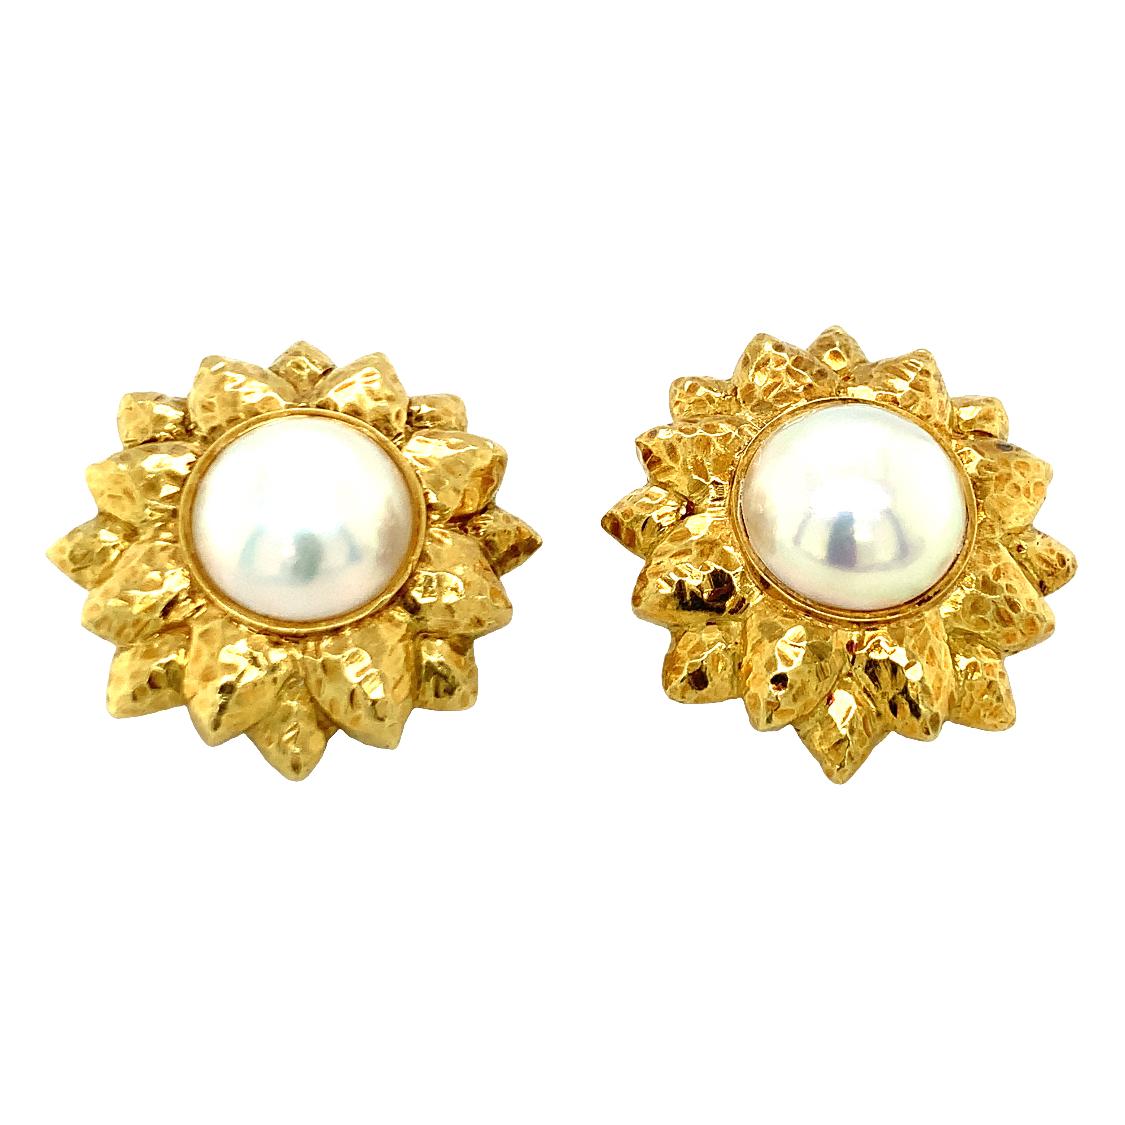 One pair of mabe pearl 18K yellow gold sunflower motif earclips featuring two bezel set, white mabe pearls each measuring 14 mm. in diameter. With a hammered gold finish throughout. Circa 1960s.

Showy, sheen, reflective.

Metal: 18K yellow